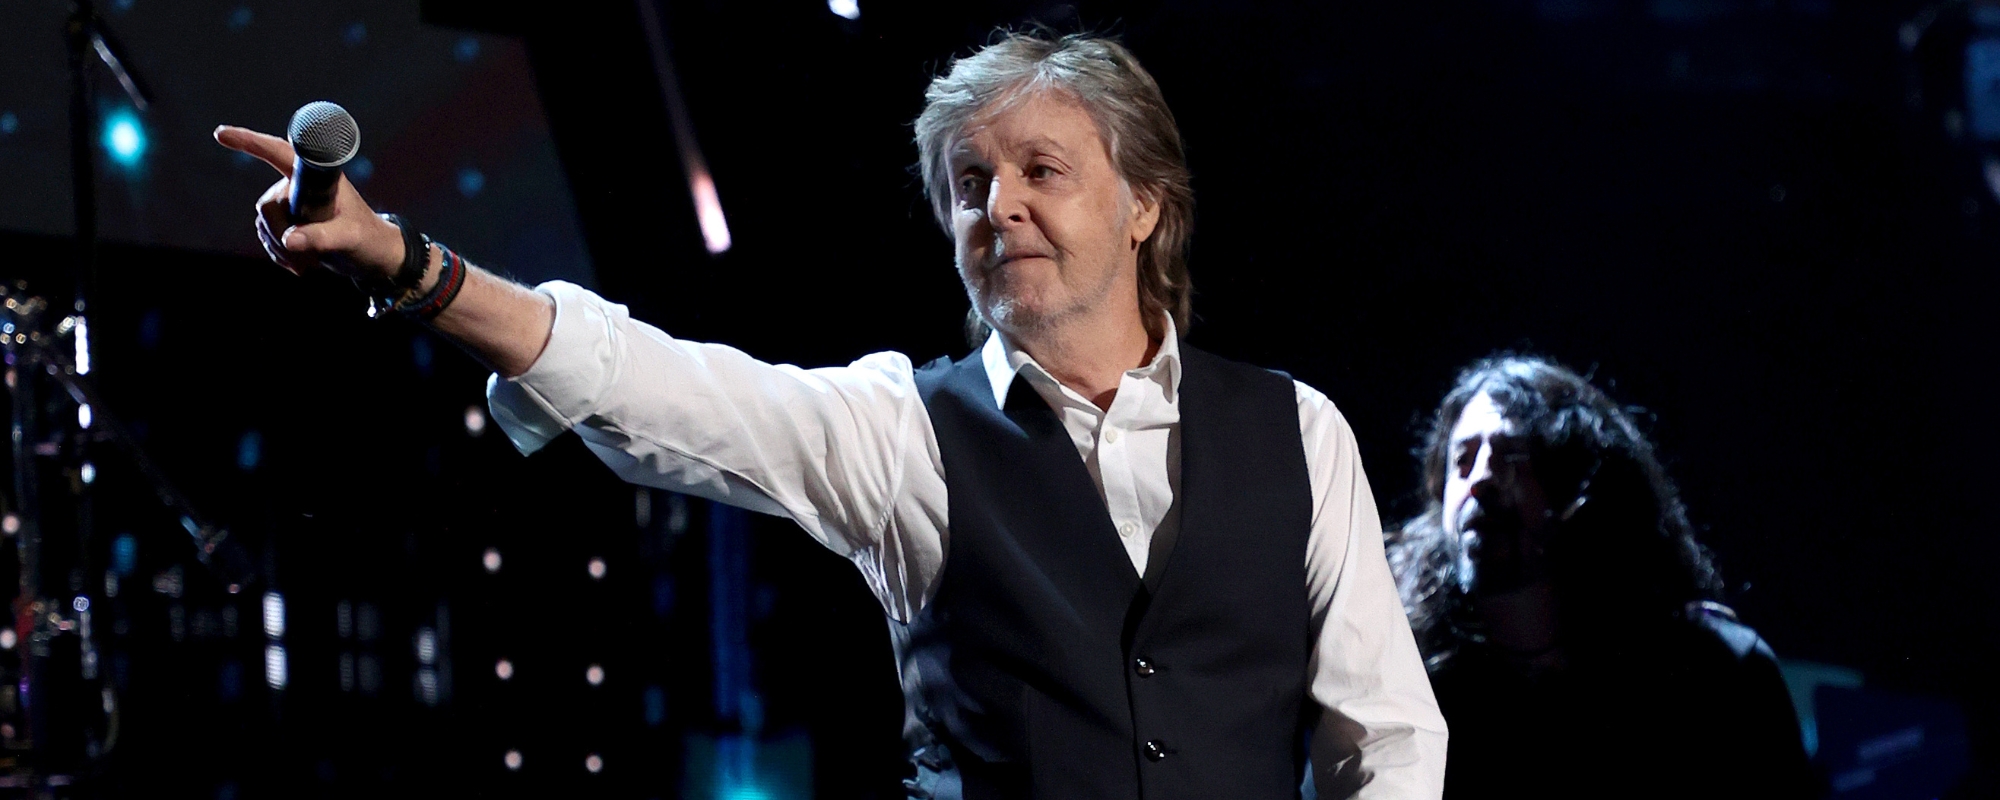 Paul McCartney Brings Fans to Tears at Intimate Brazilian Club Show